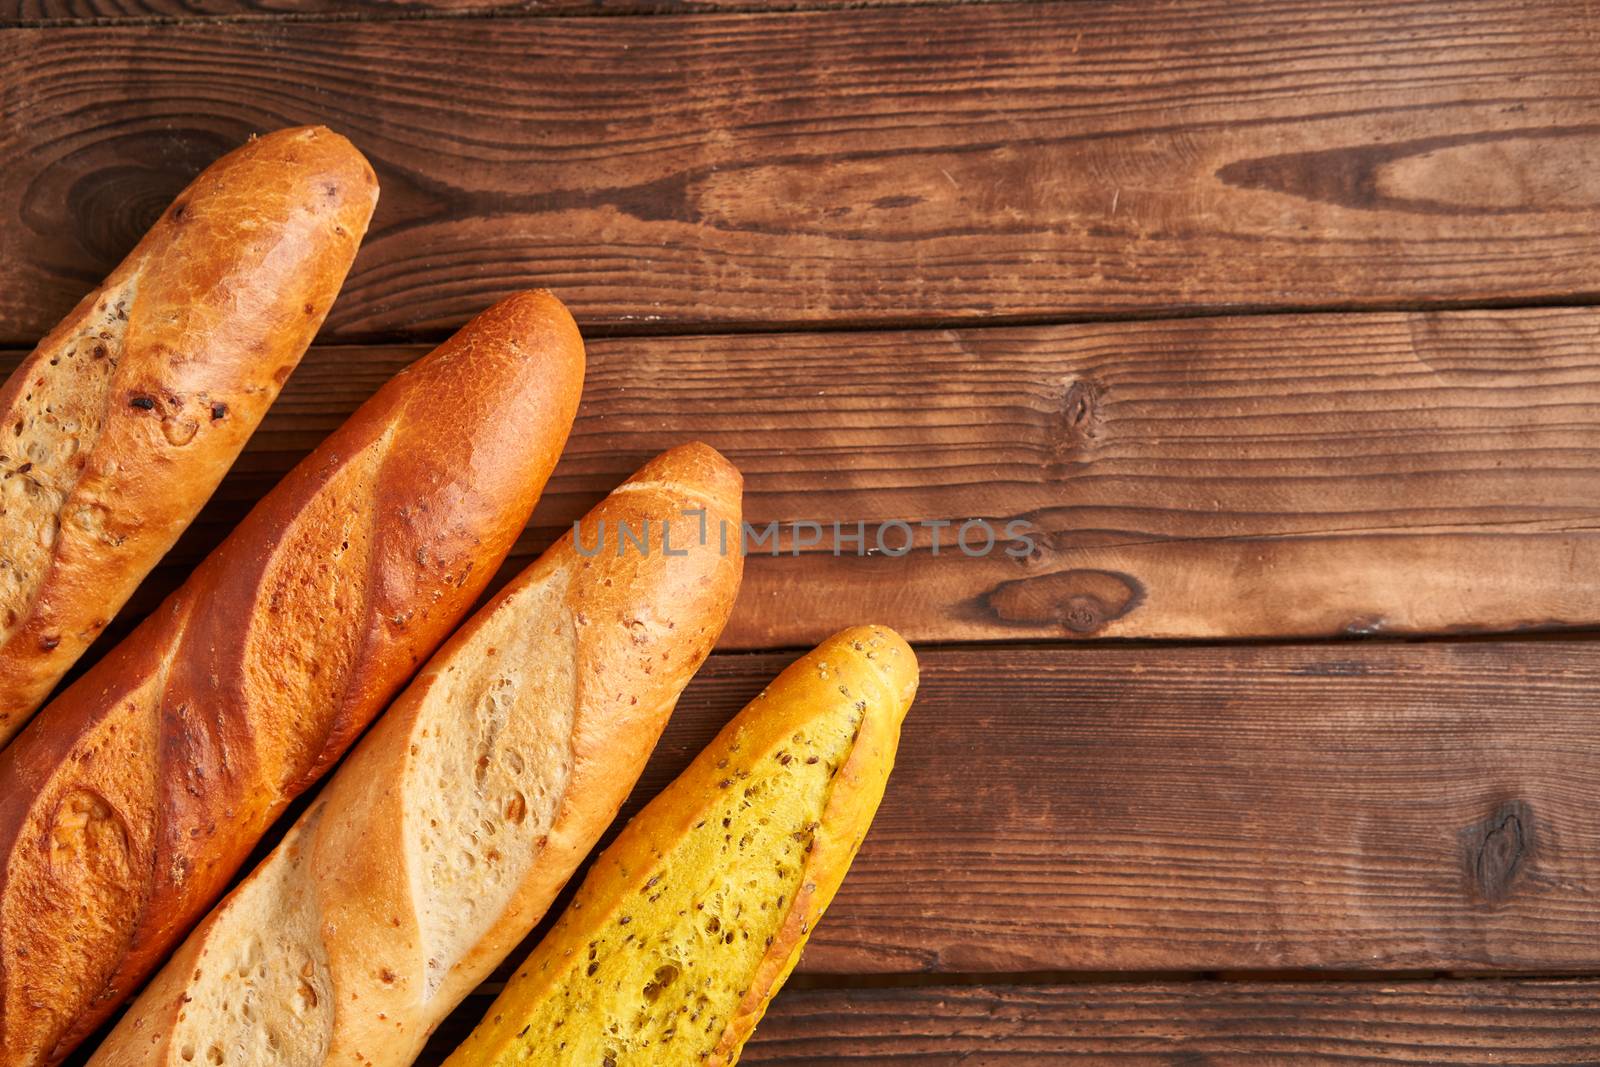 Three crispy french baguettes lie on an old wooden table with free space for text baguettes in assortment with sesame seeds Classic french national pastries Copy space Concept for menu or advertising